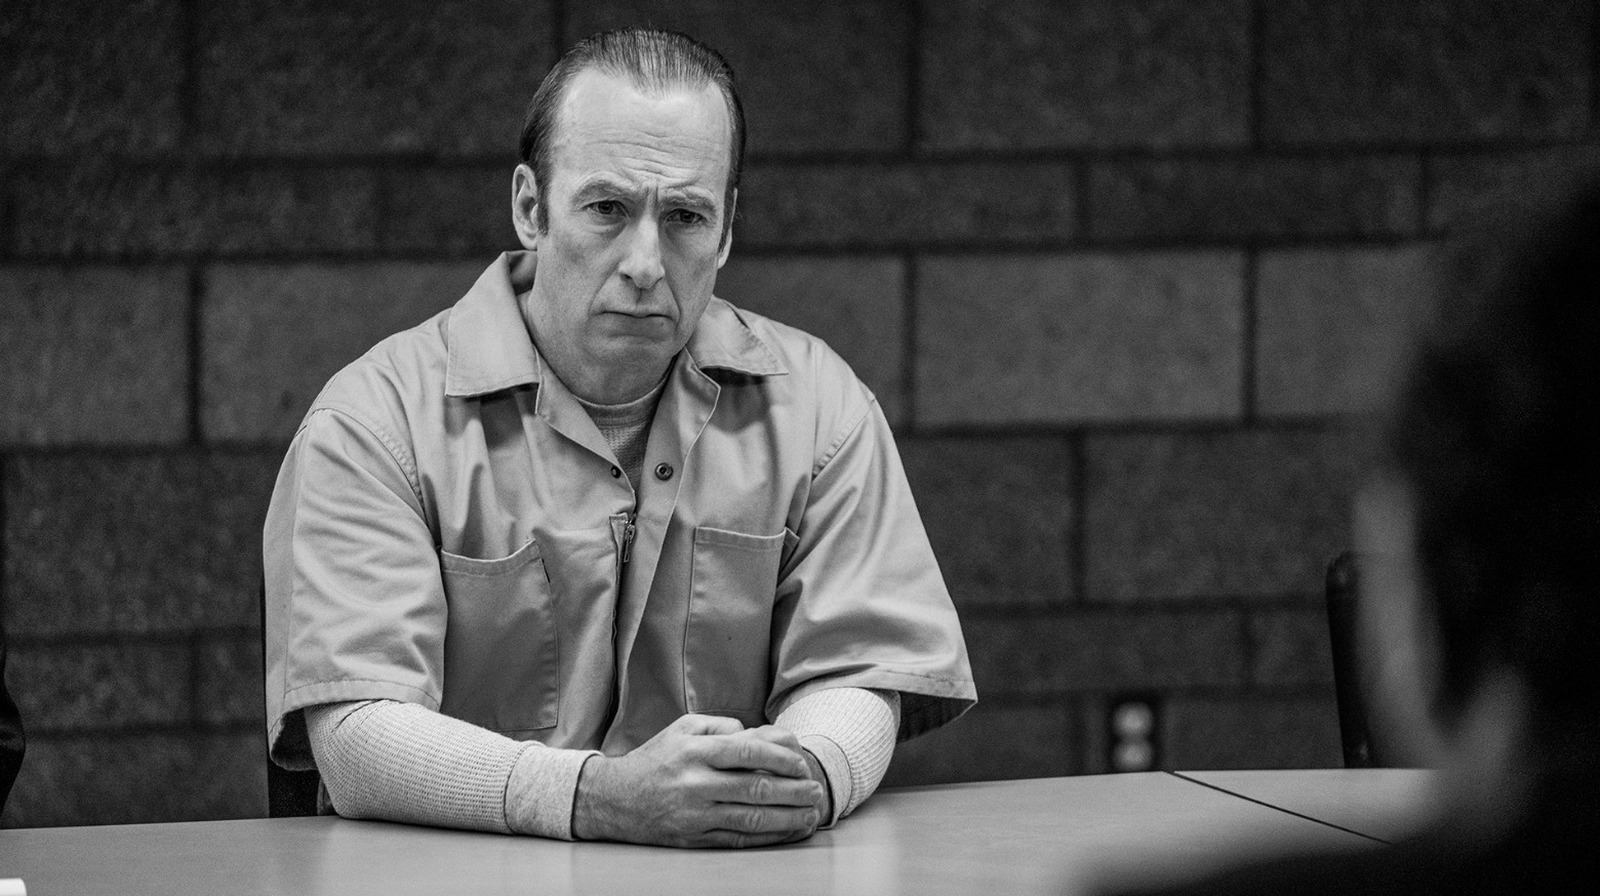 #Here’s When And Why Jimmy Made That Fateful Decision In The Better Call Saul Finale